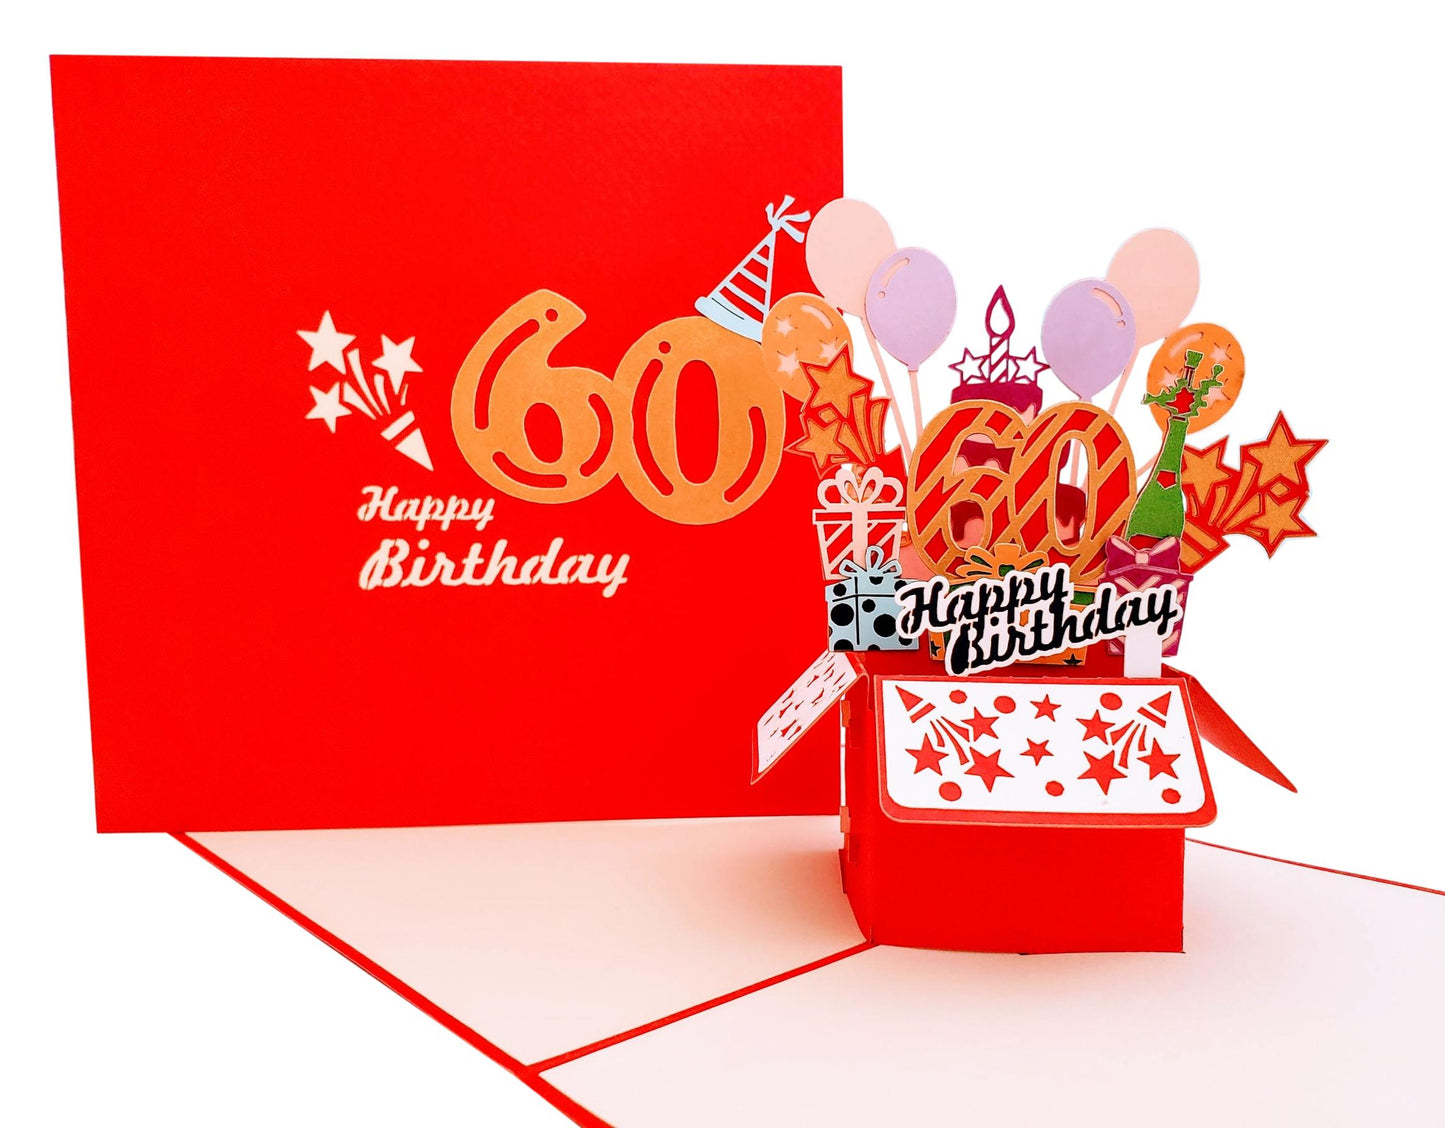 Happy 60th Birthday Red Party Box 3D Pop Up Greeting Card - Birthday - Fun - Milestone - Special Day - iGifts And Cards